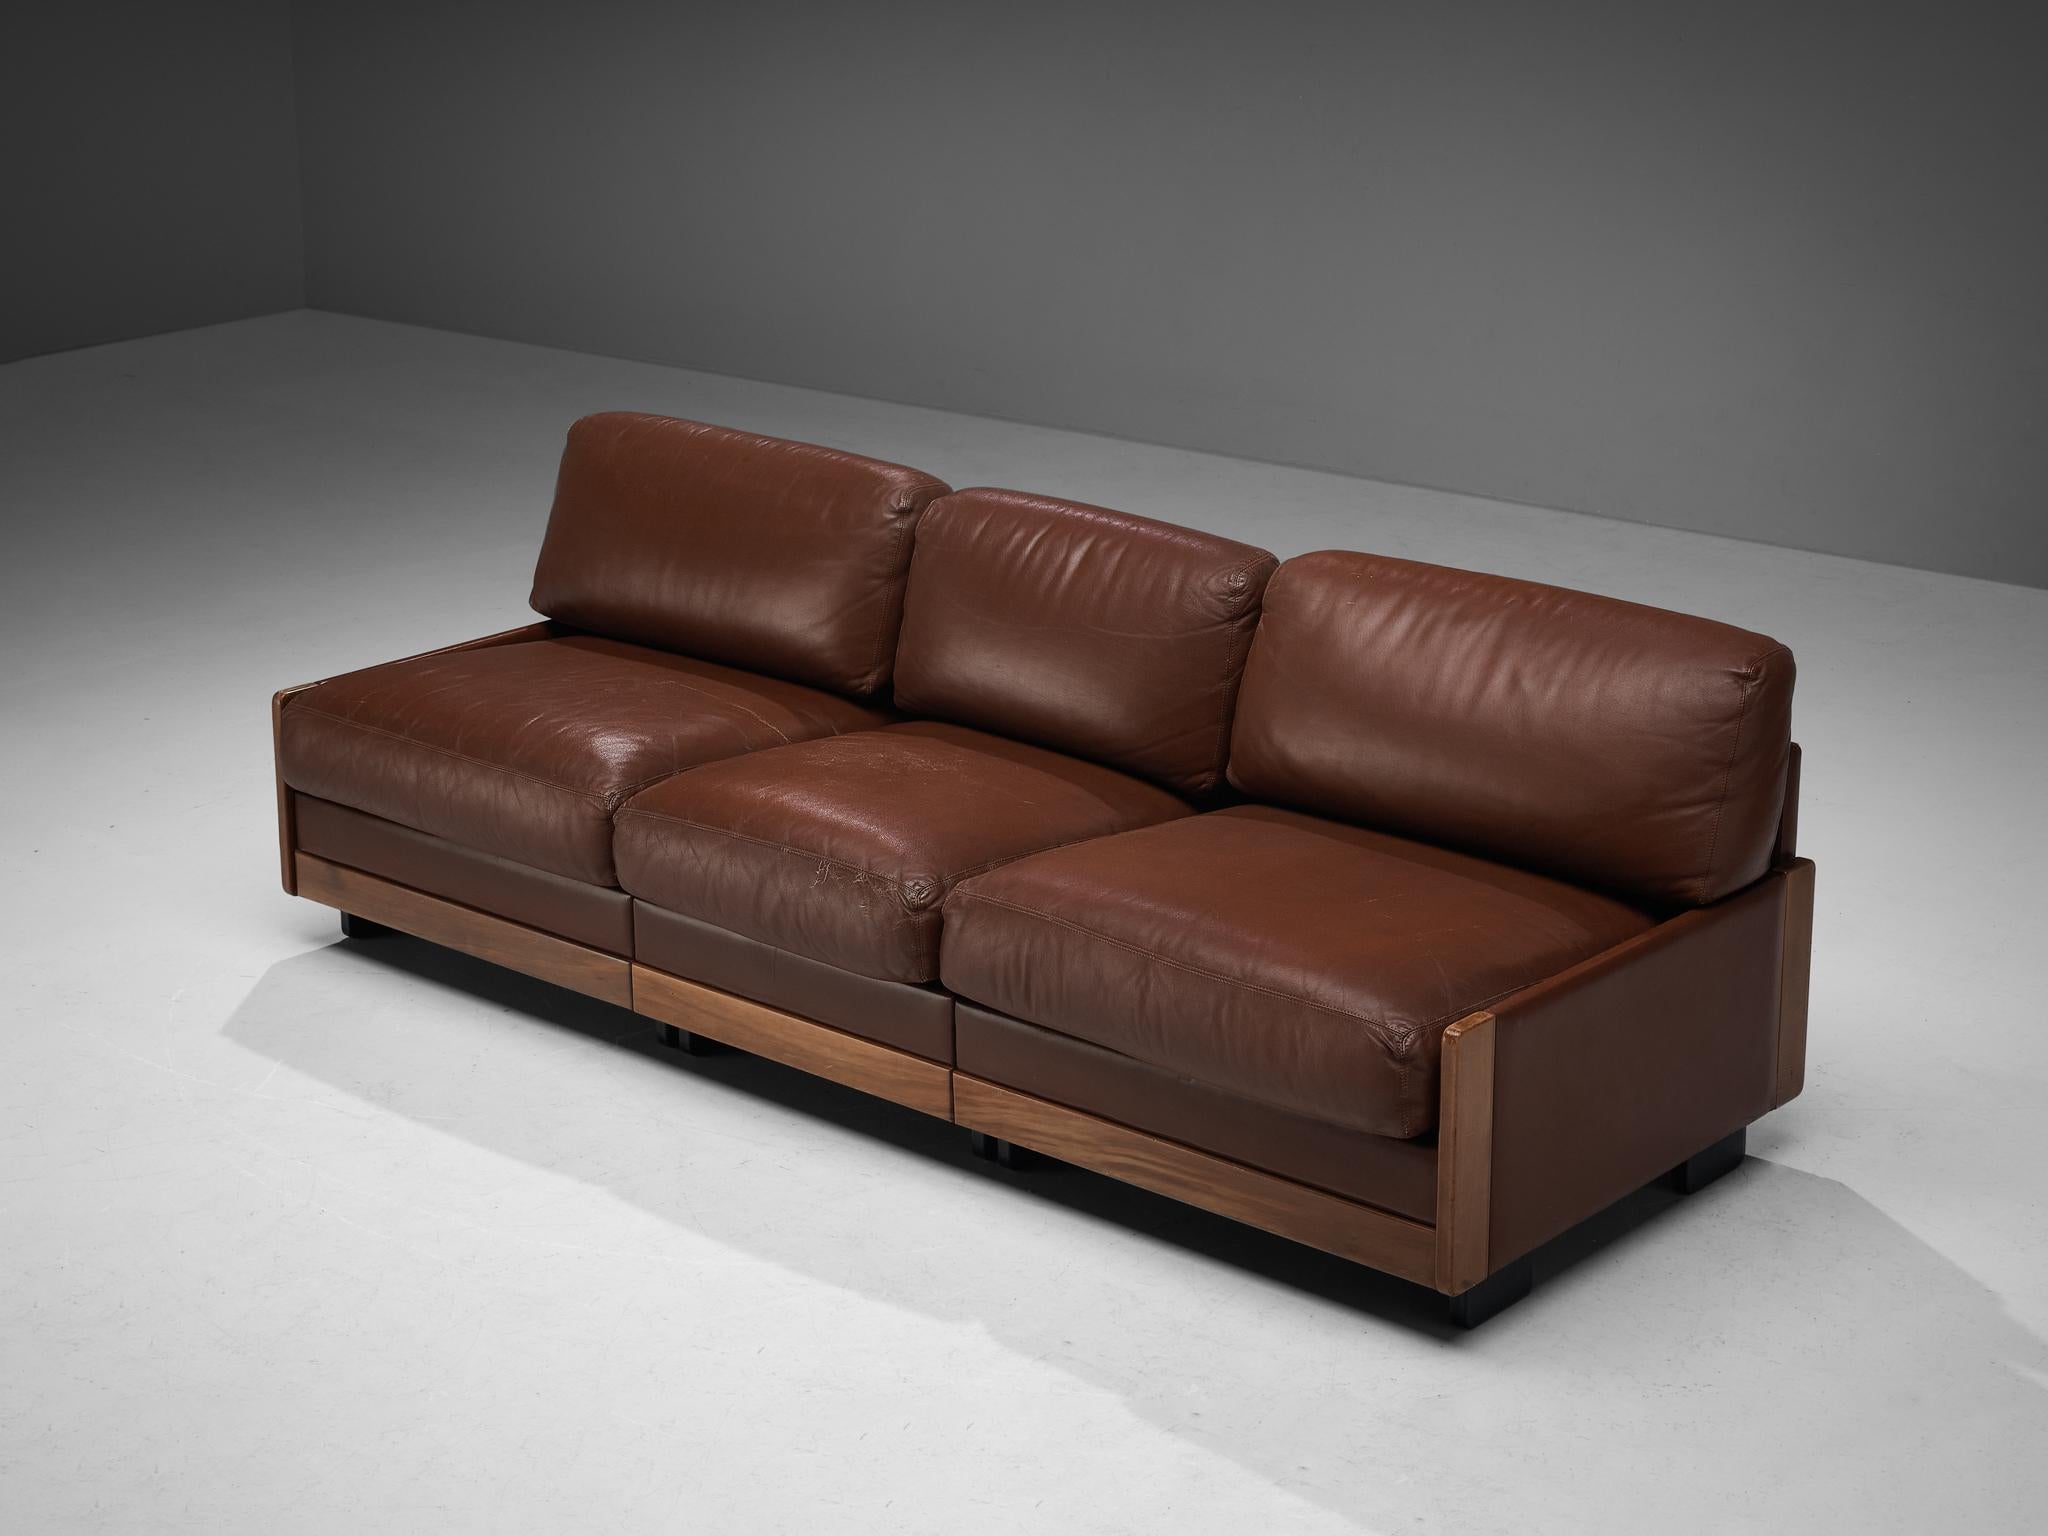 Afra & Tobia Scarpa for Cassina Sofa in Walnut and Brown Leather 2